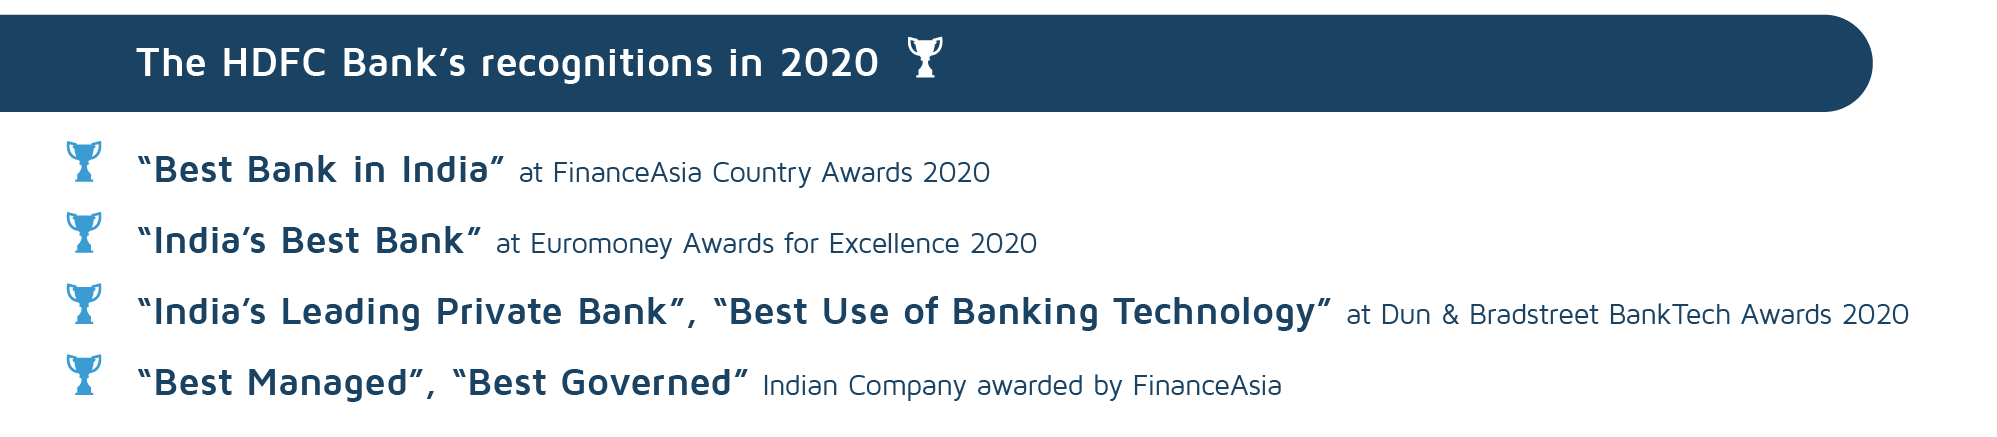 The recognitions of HDFC Bank in 2019